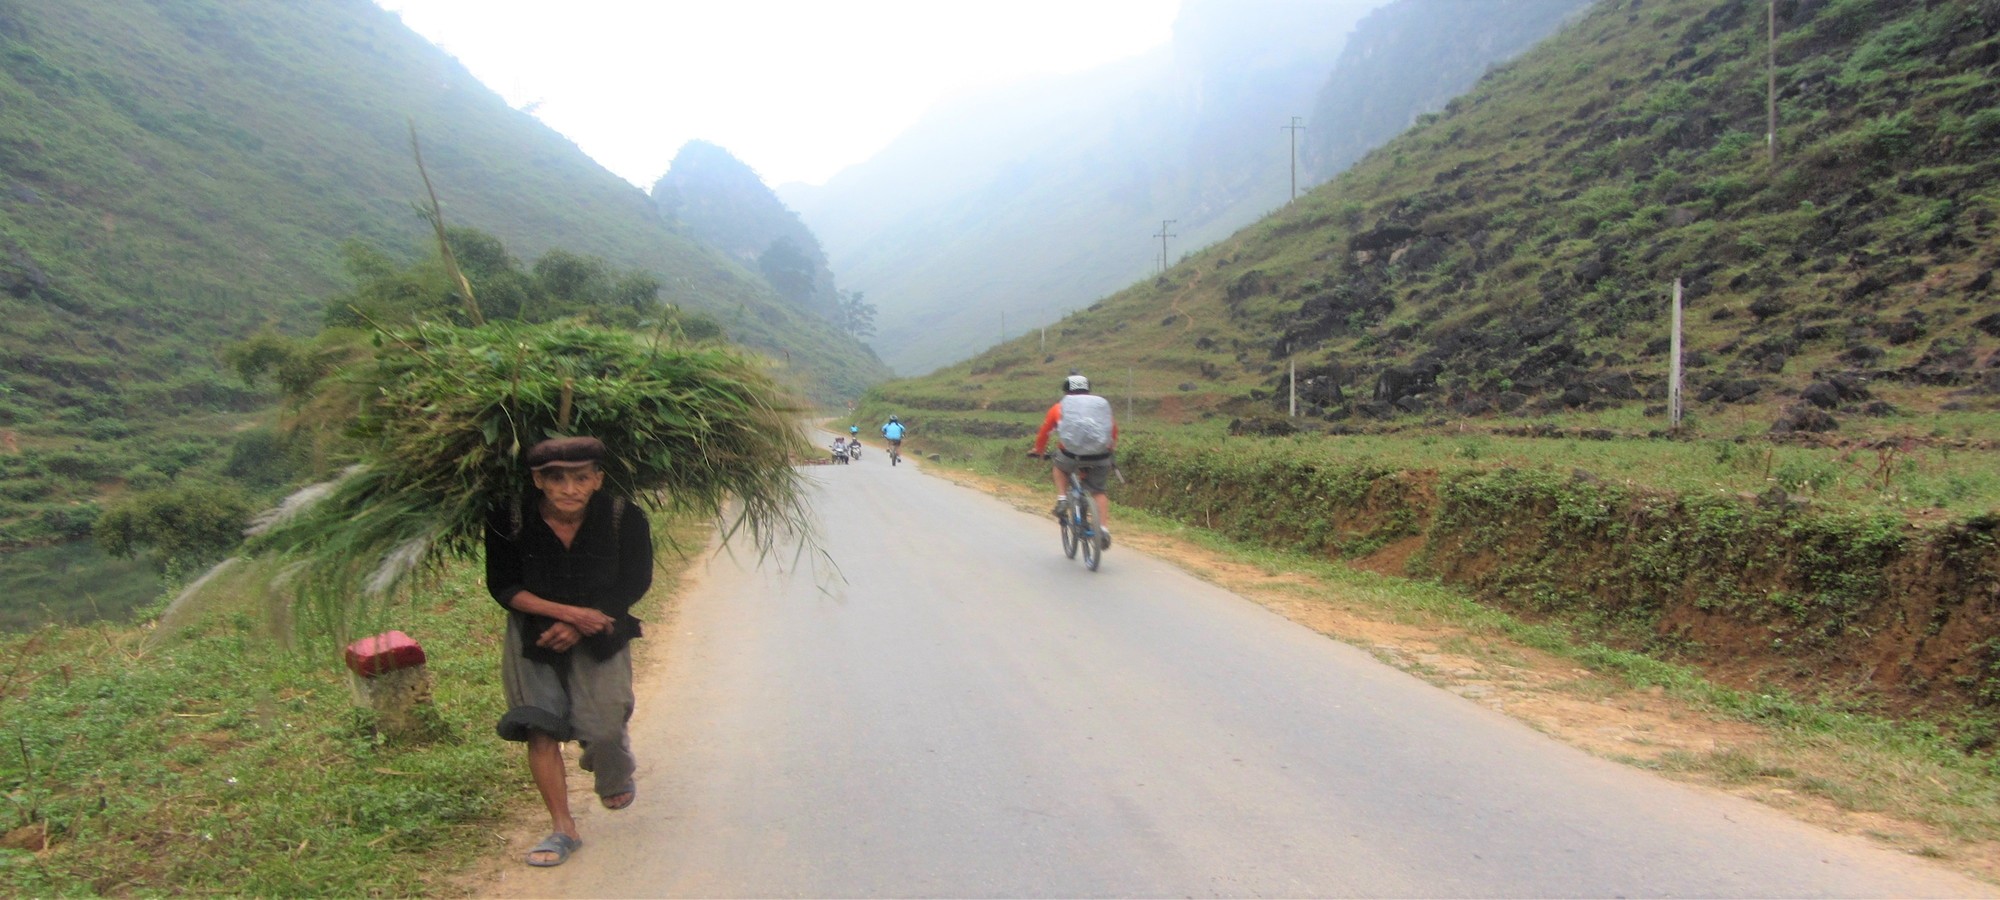 Photos from our Vietnam N.E Cycling Holiday